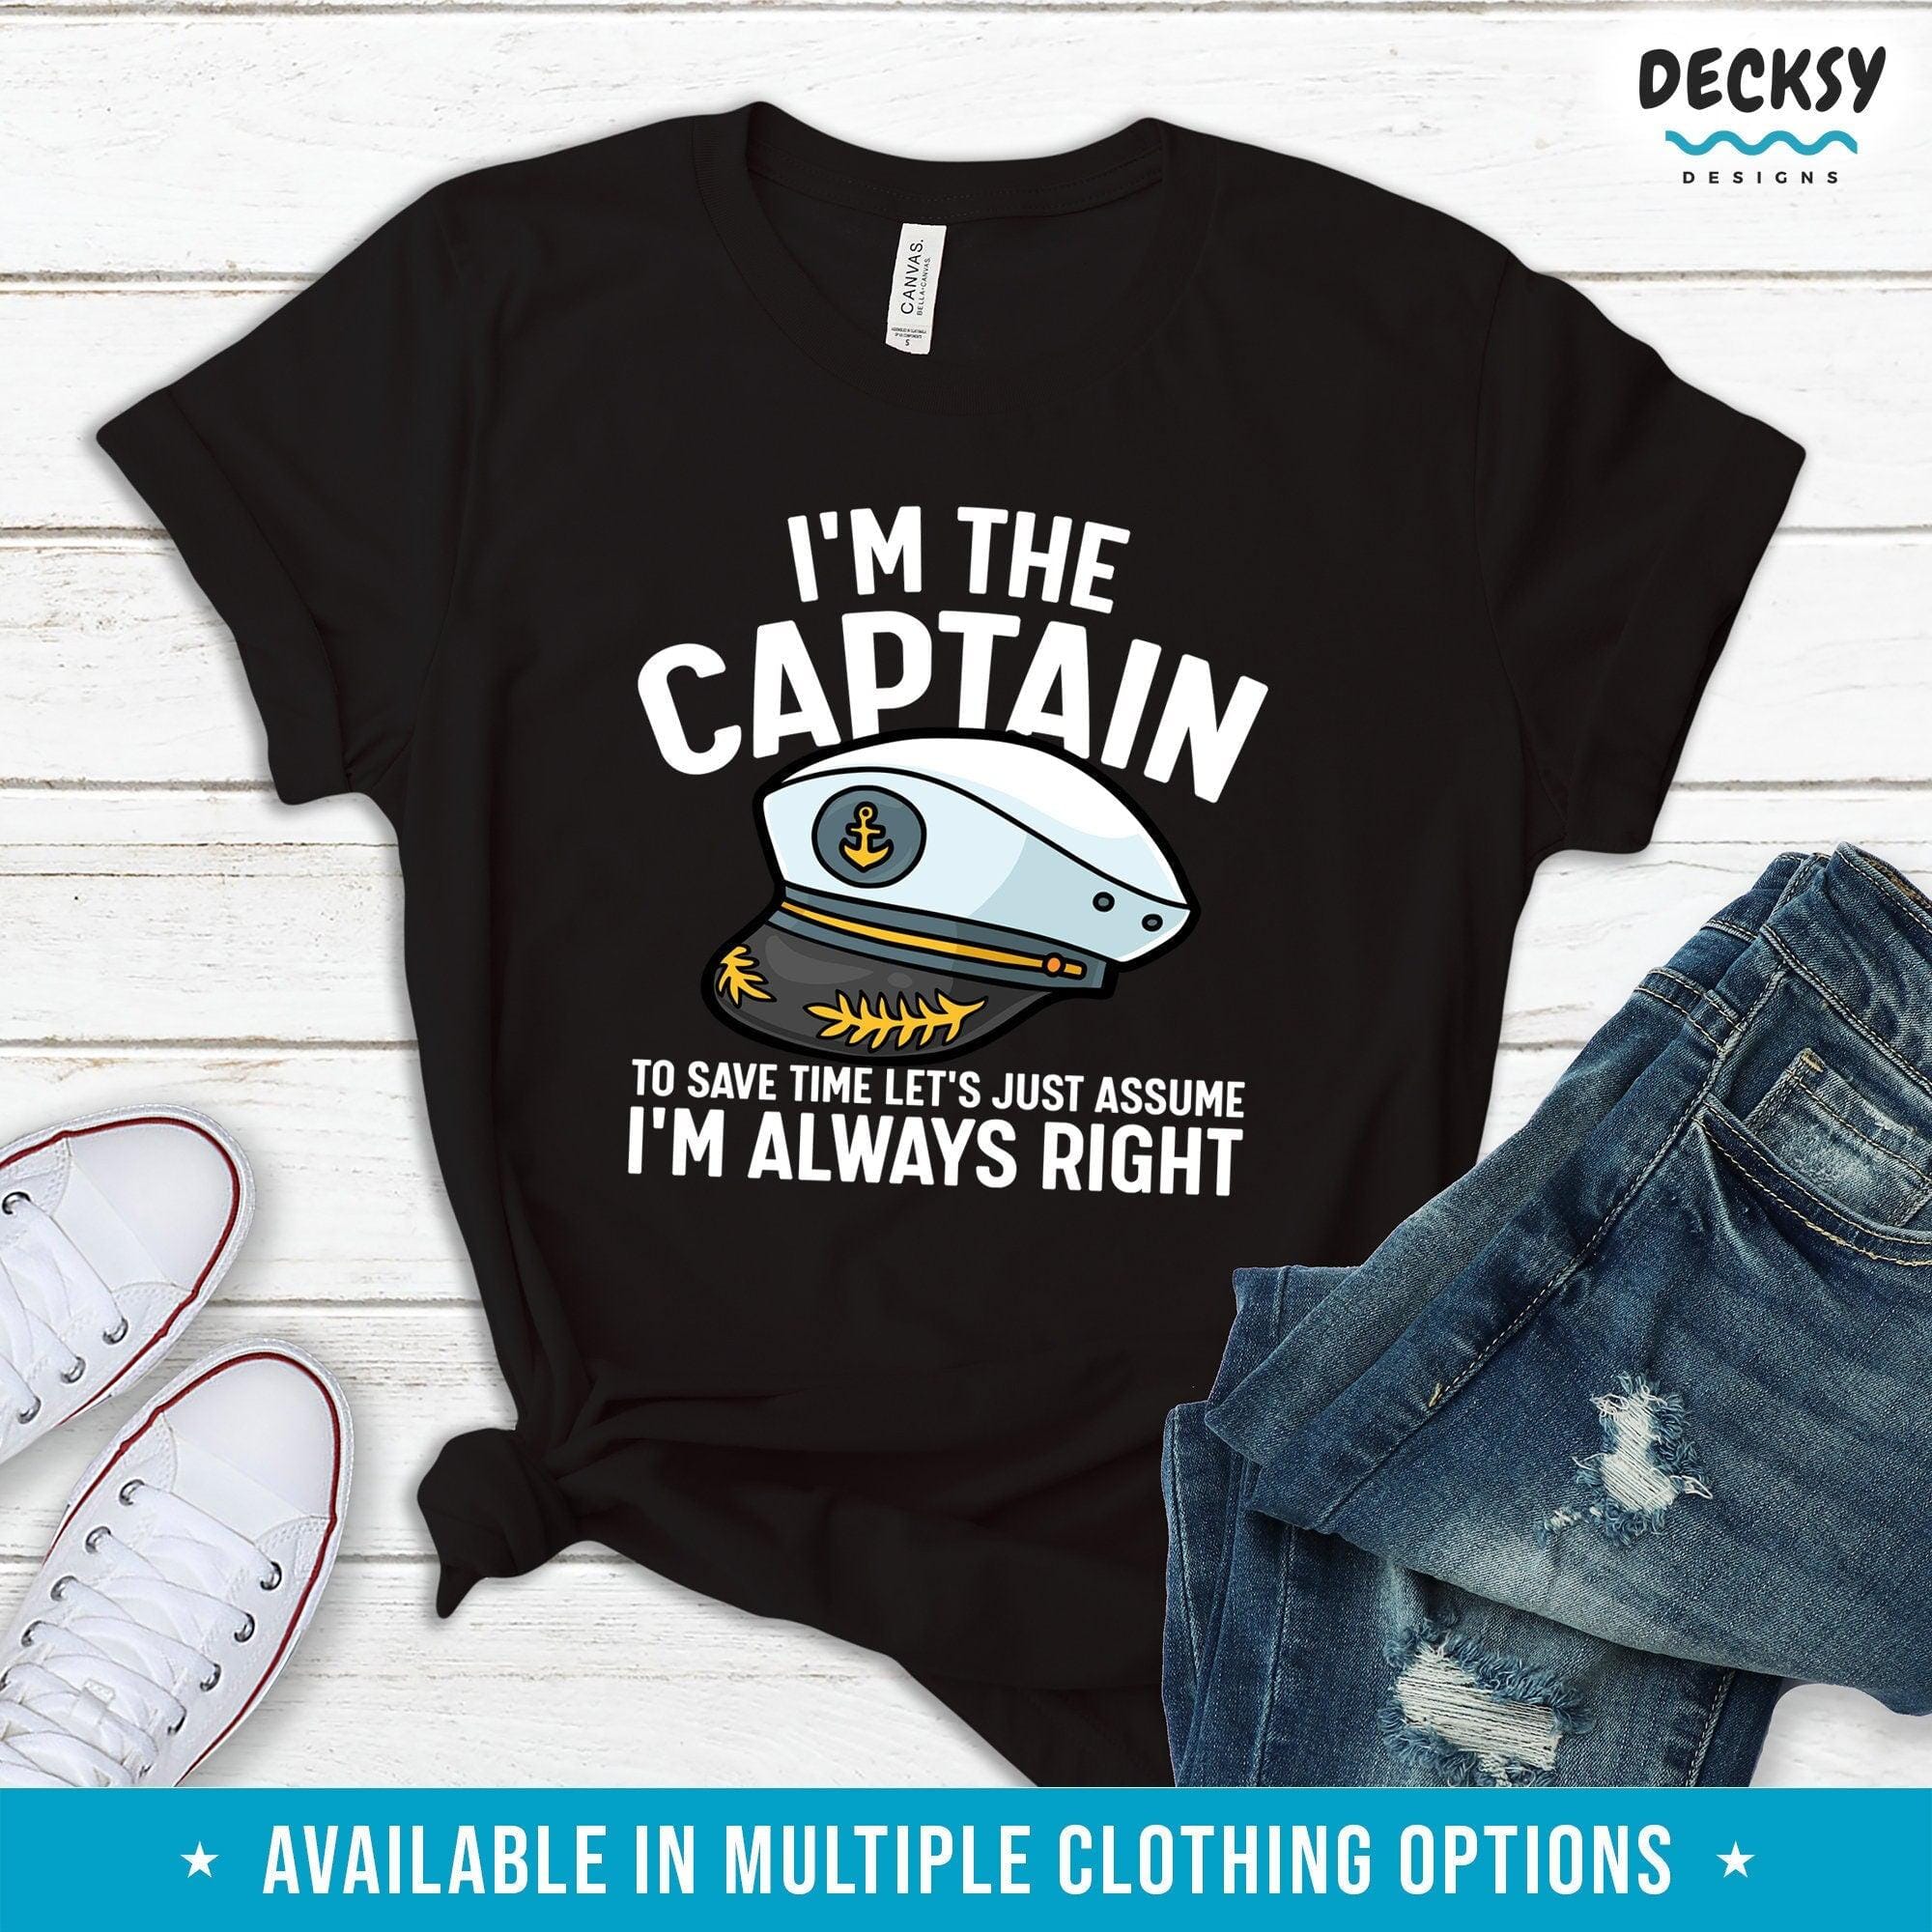 Ship Captain Sailor Shirtr, Yacht Gift-Clothing:Gender-Neutral Adult Clothing:Tops & Tees:T-shirts:Graphic Tees-DecksyDesigns